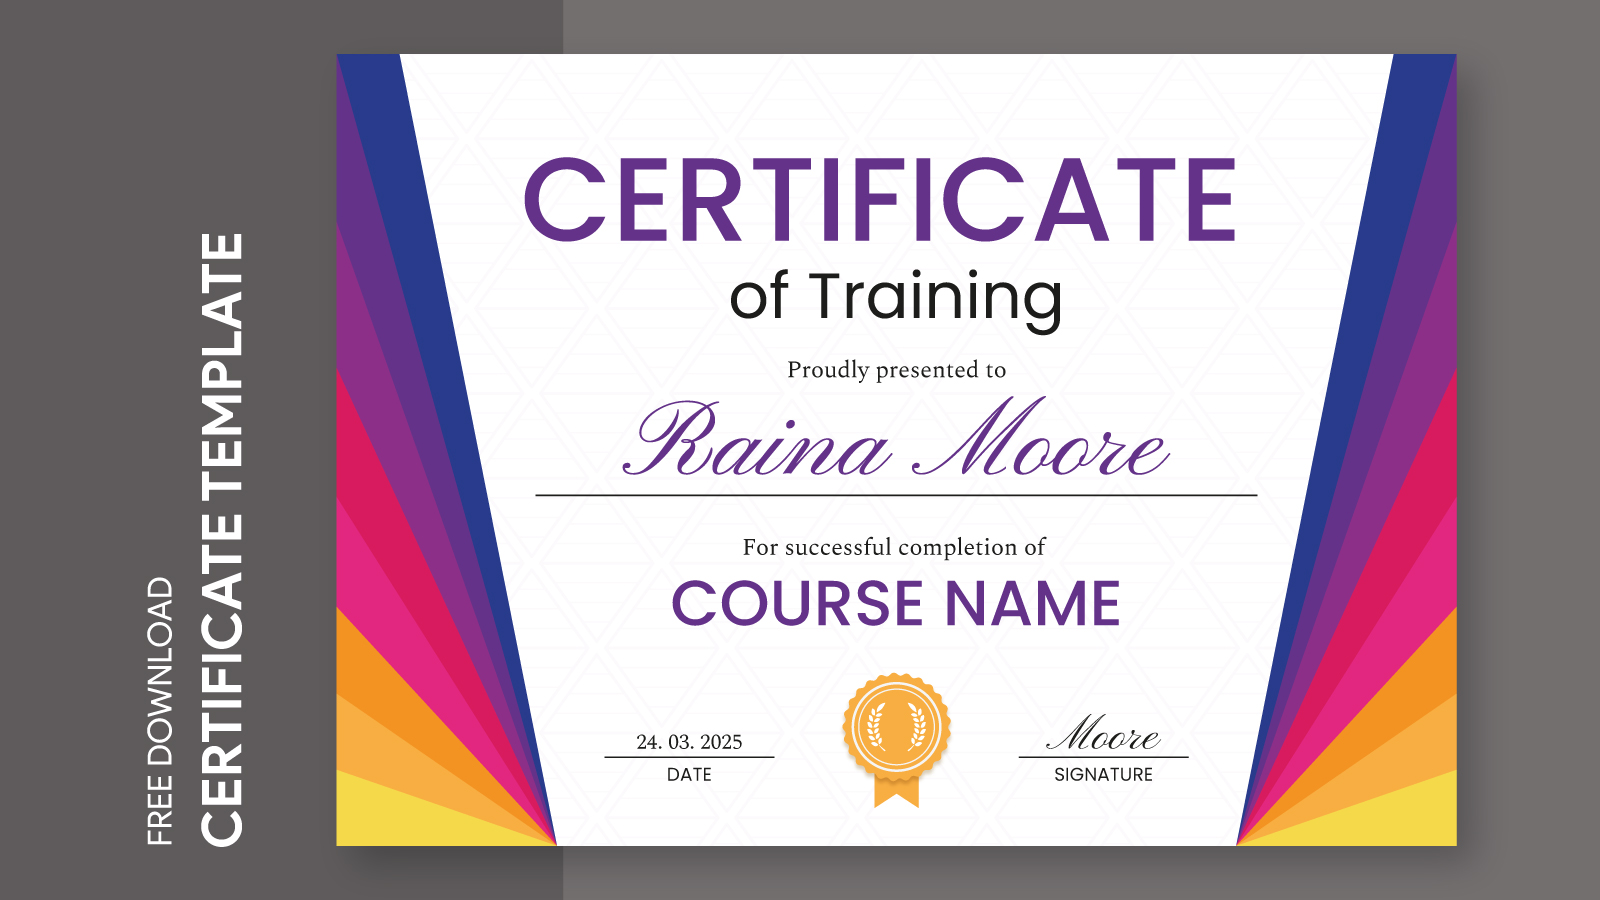 FREE Course Certificate Template - Download in Word, Google Docs